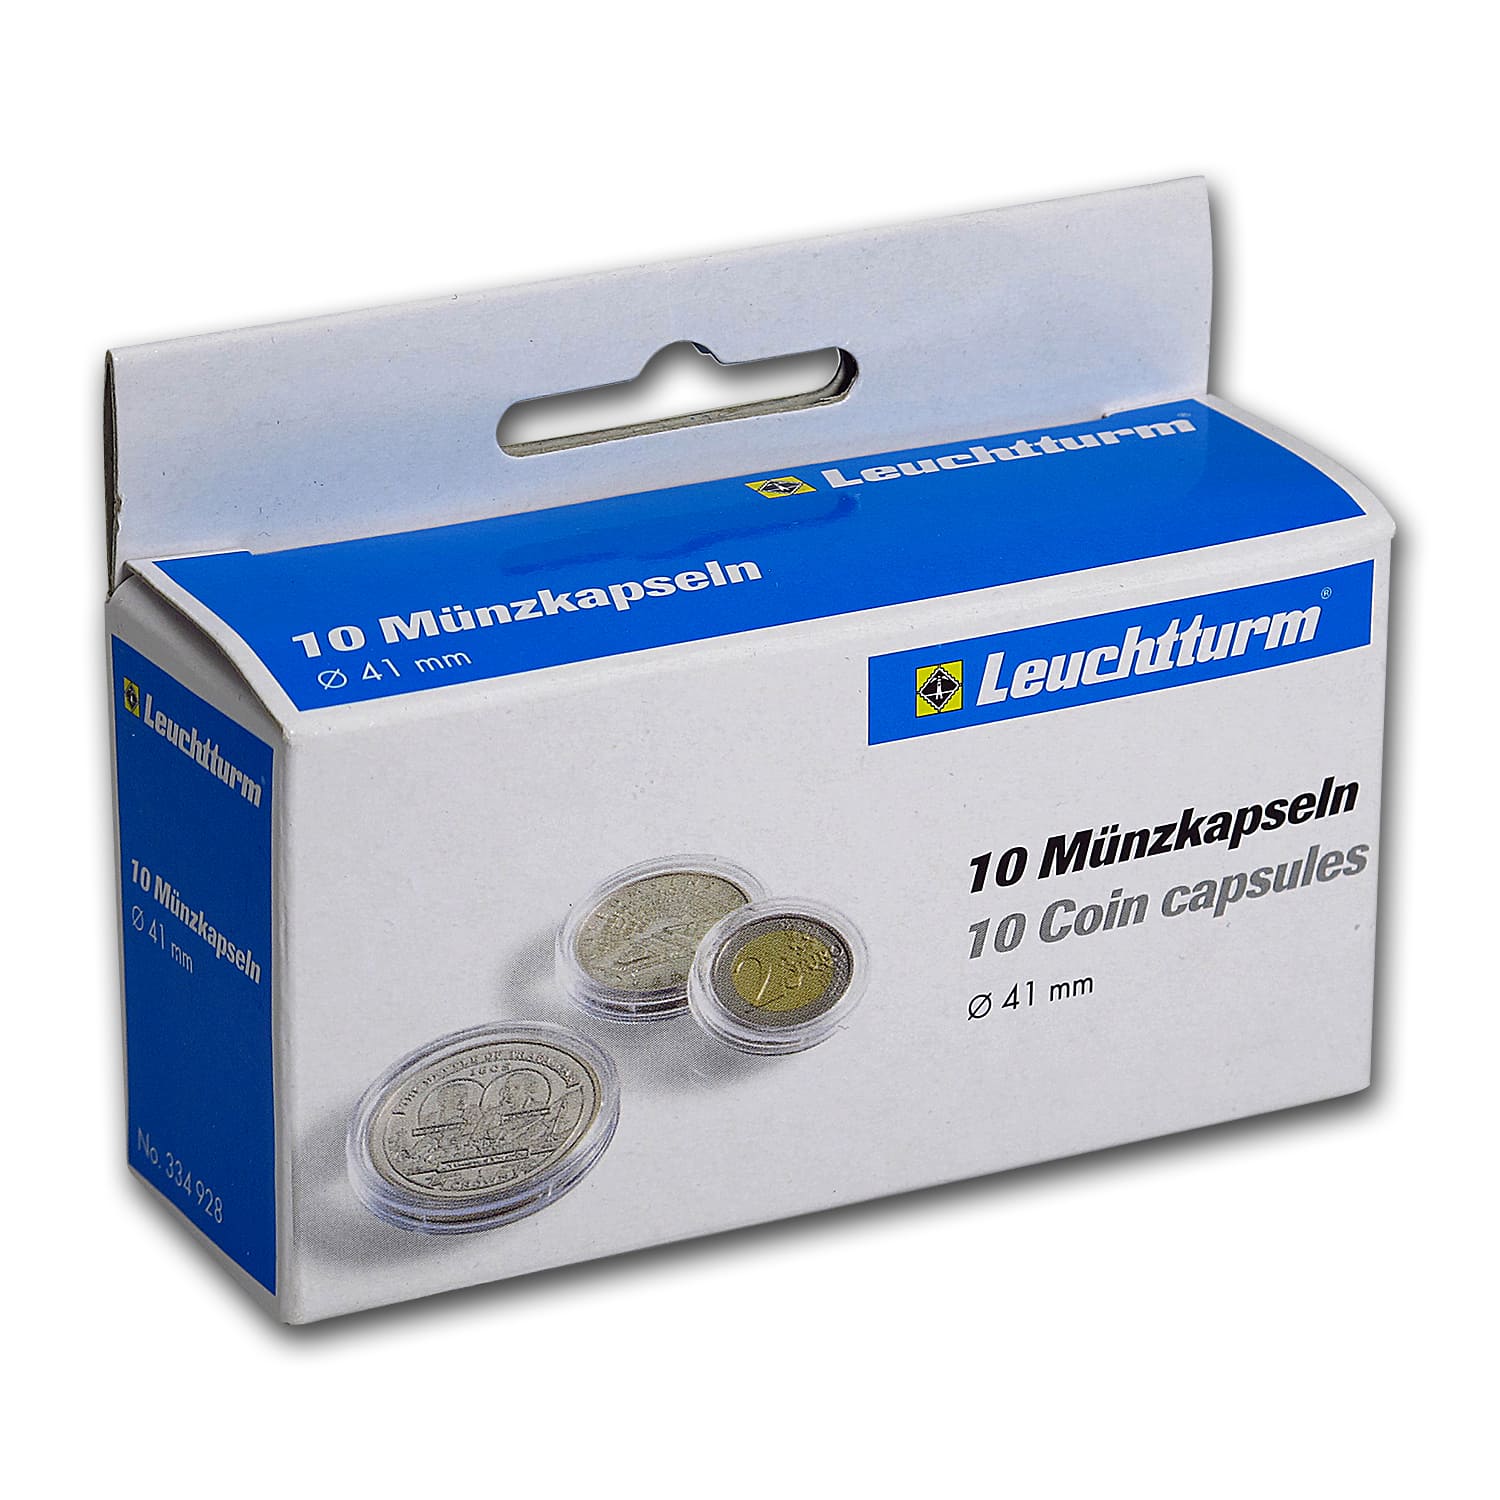 Buy Lighthouse Capsules - 41 mm (10 count Packs) - Click Image to Close